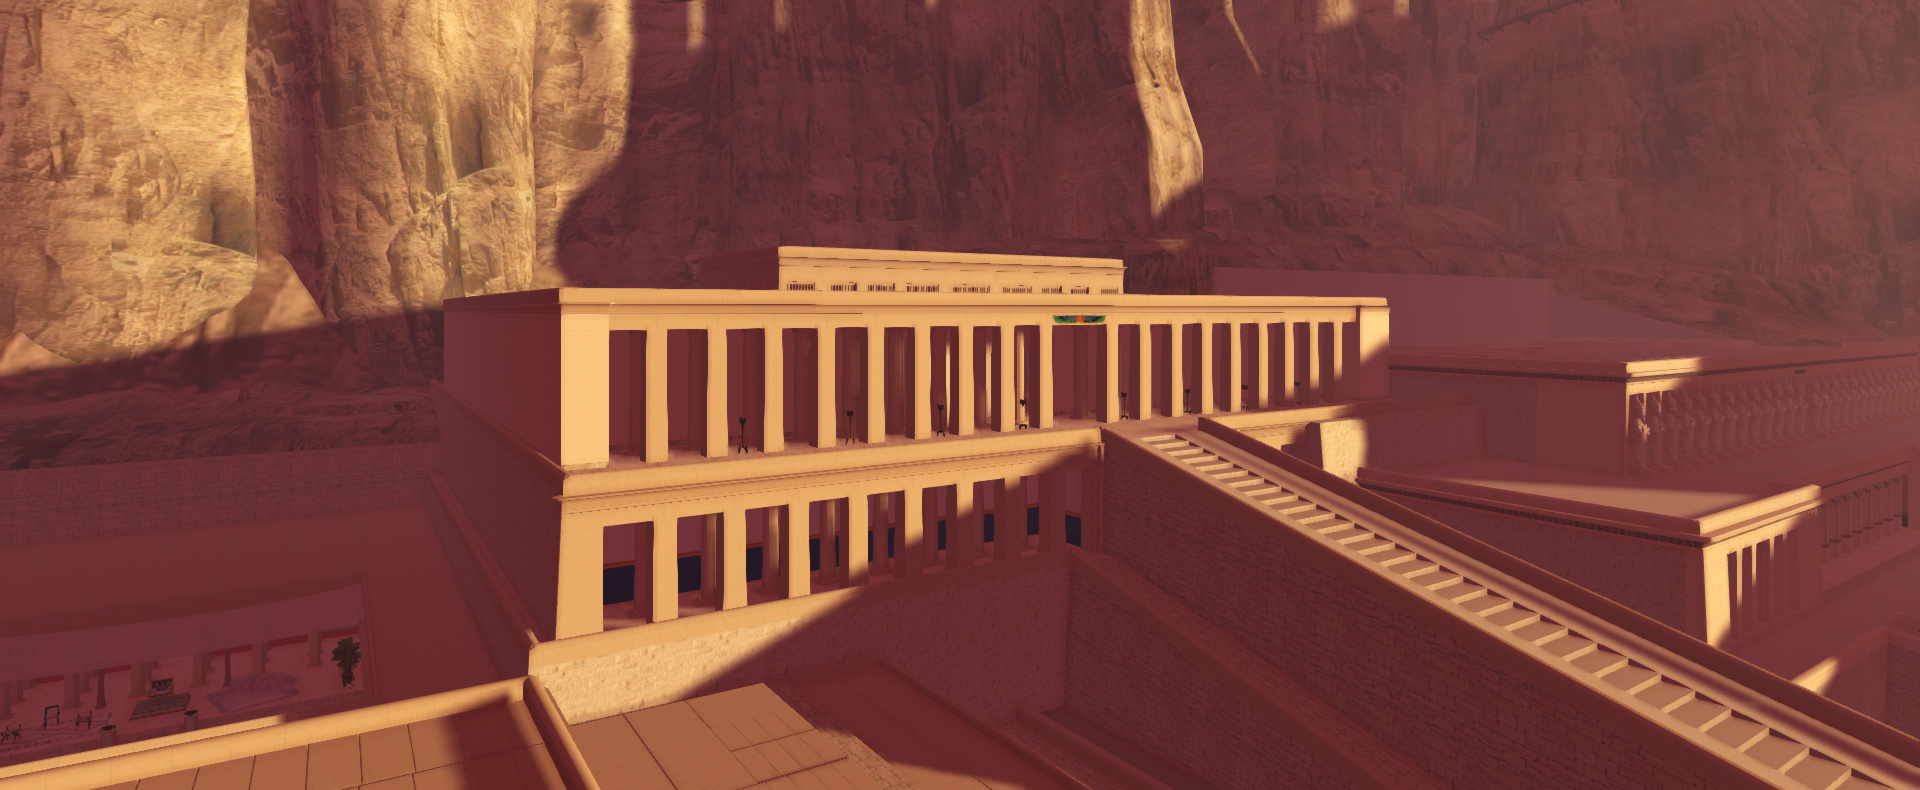 The Mortuary Temple of Thutmose III ~ Kemet in Secondlife1920 x 790